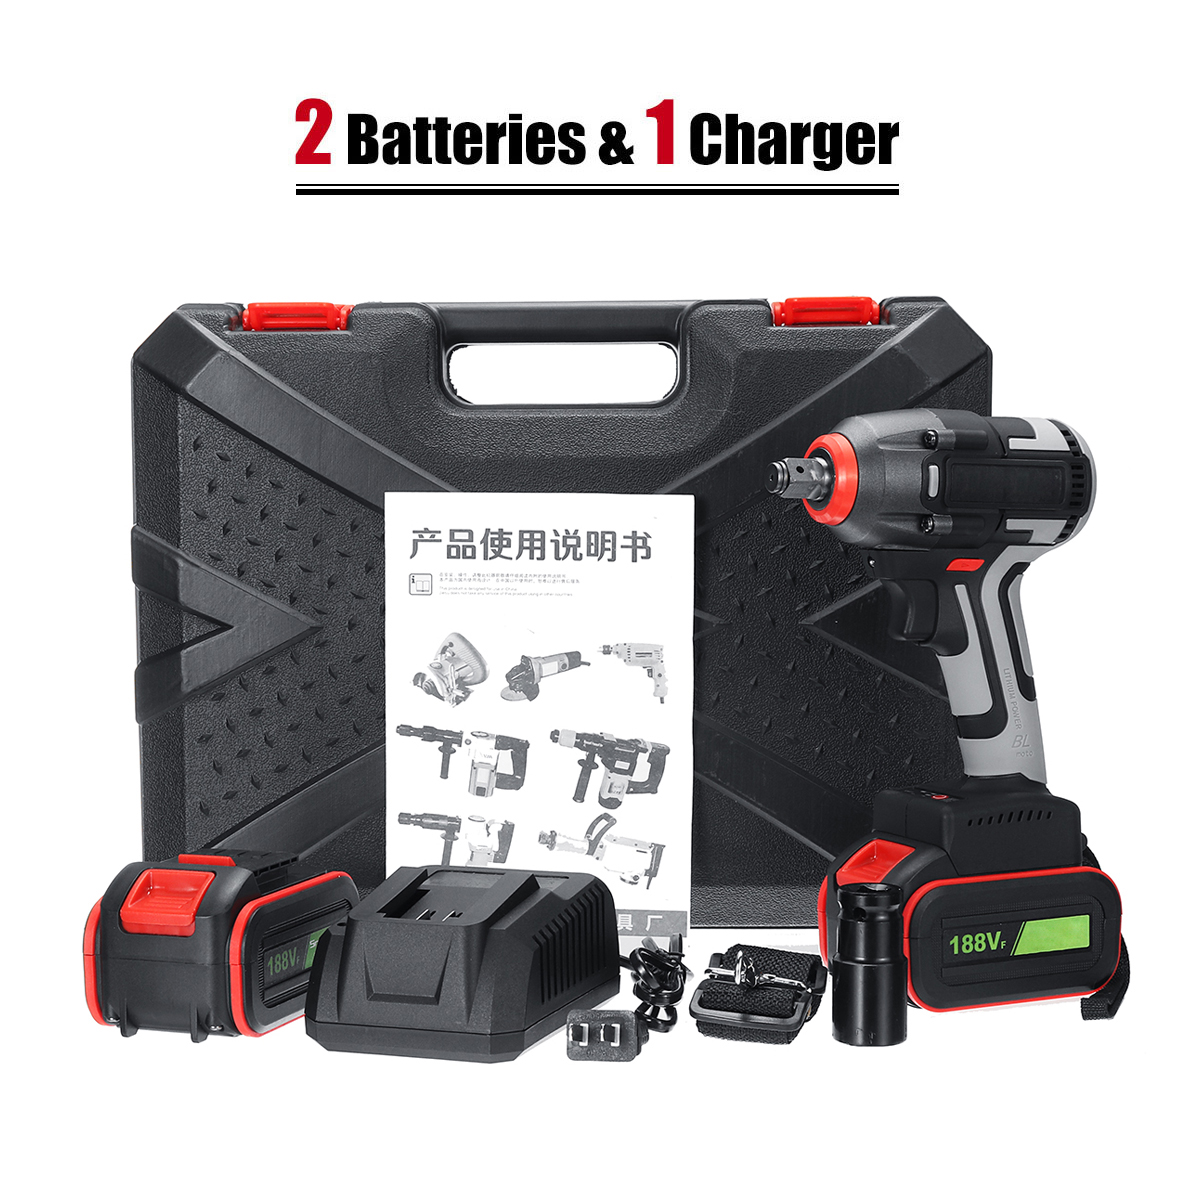 100-240V-Torque-450NM-Electric-Impact-Wrench-Cordless-Motor-Brushless-Rattle-Driver-1444636-5